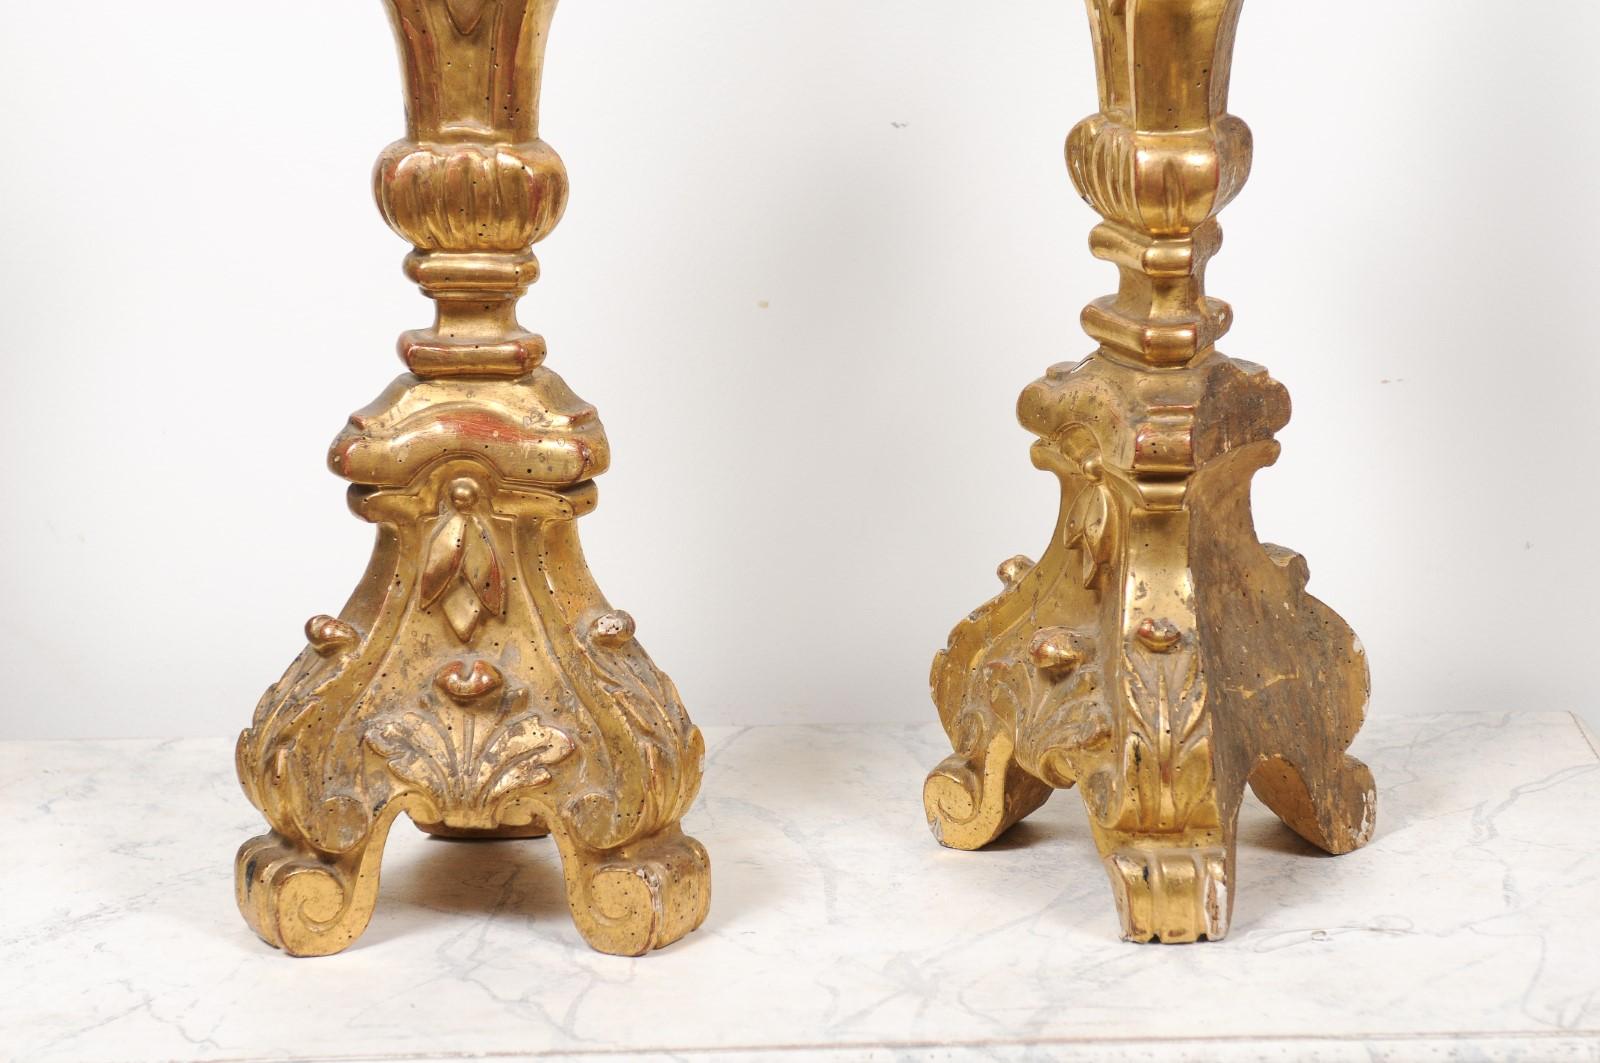 Pair of French 19th Century Gilt Candlesticks with Carved Foliage and Volutes For Sale 8